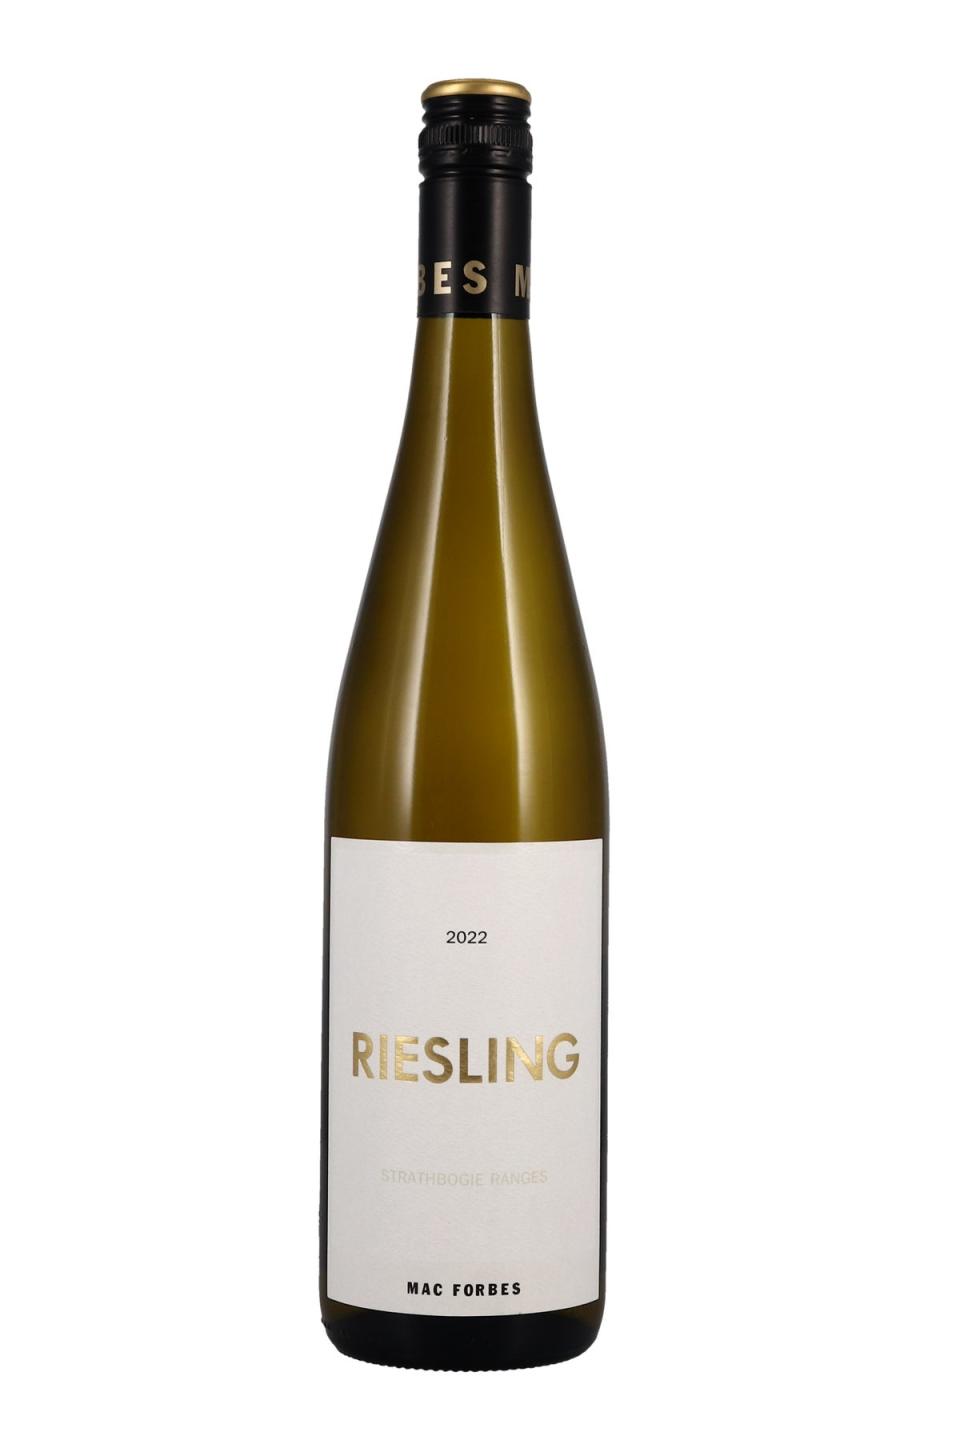 Mac Forbes Strathbogie Riesling 2022 (Mac Forbes)